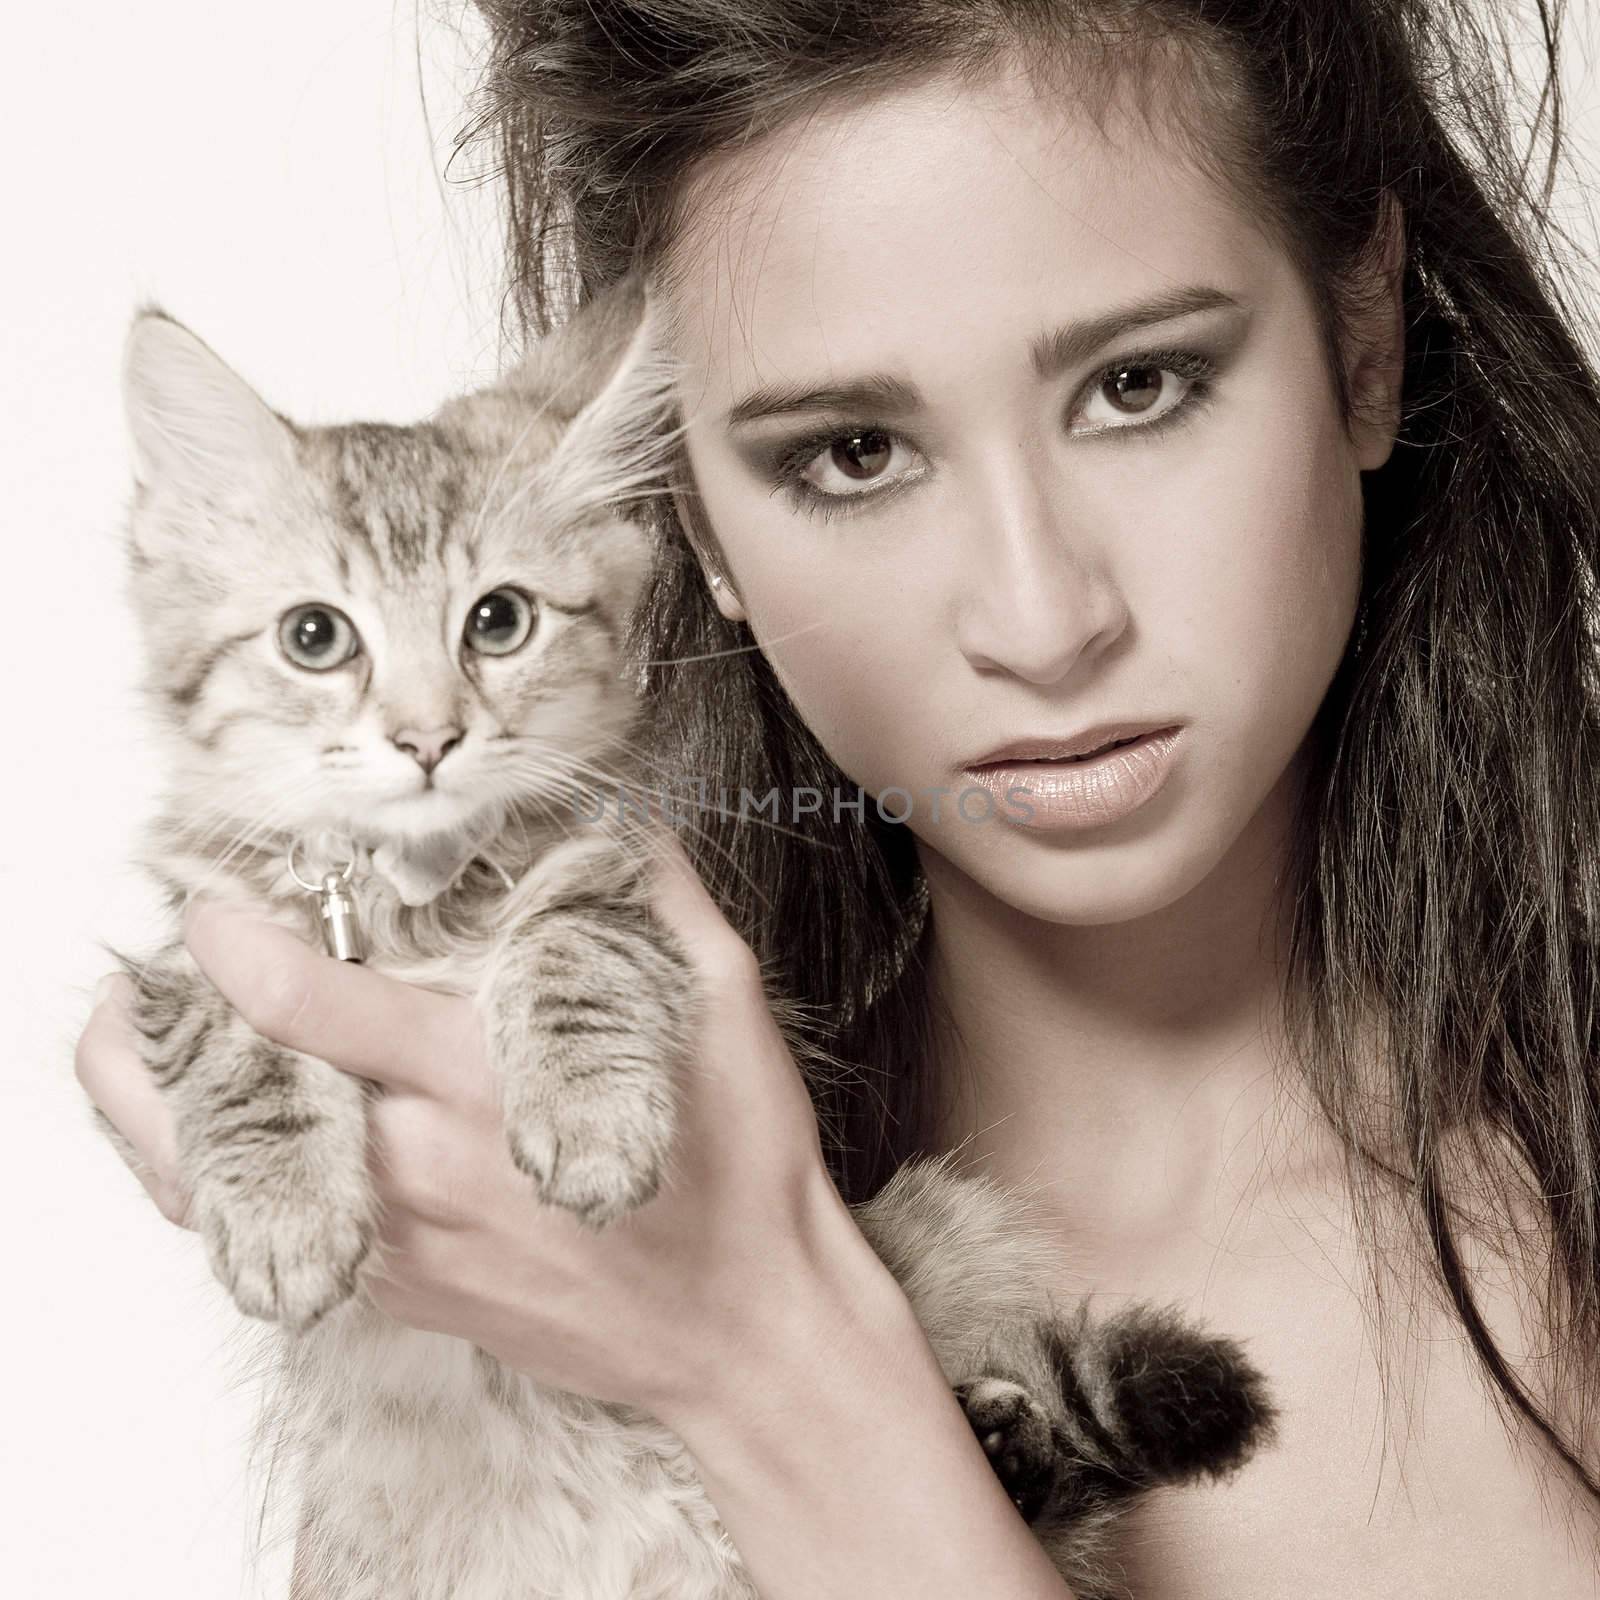 Mixed raced young beauty and the kitten by DNFStyle